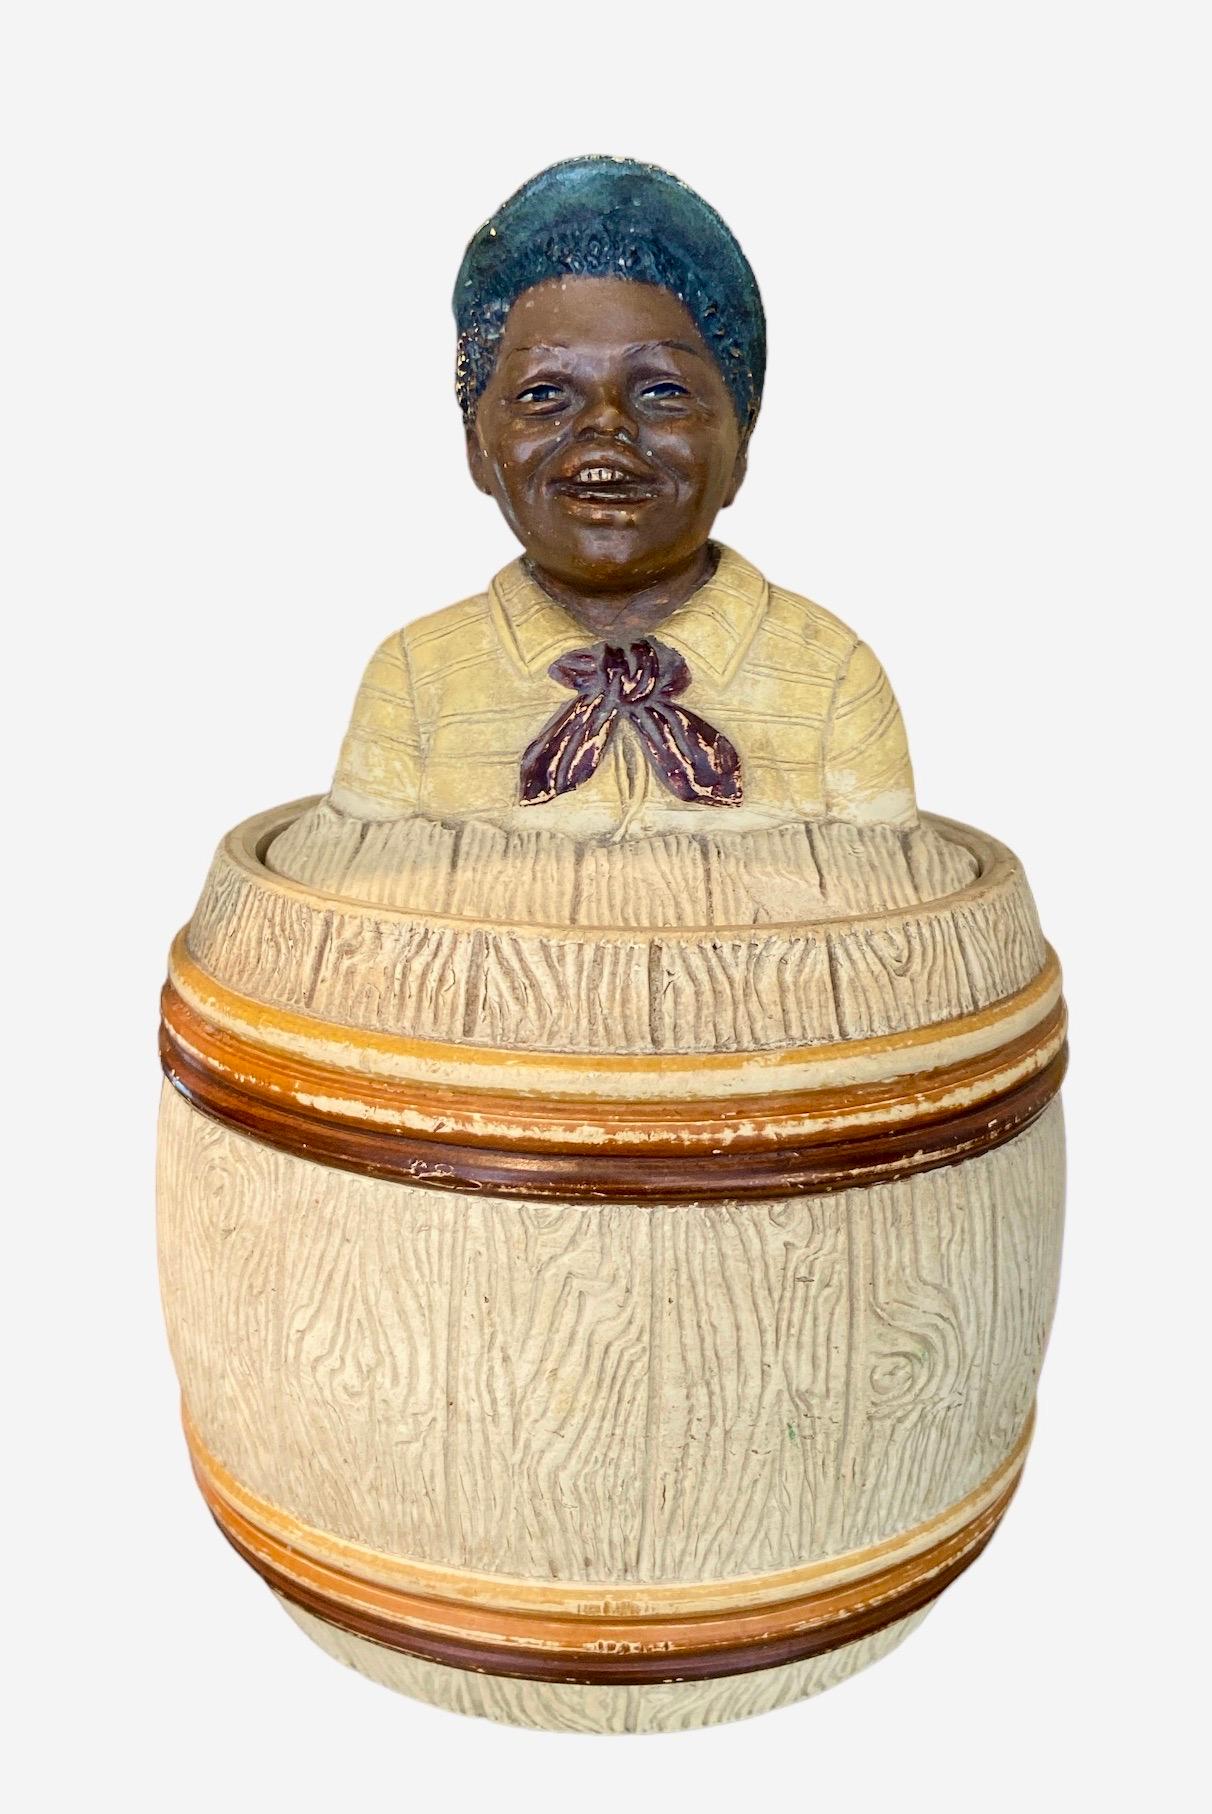 The tabacco jar is in the form of a wooden barrel with a smiling little boy on top. Hand painted terracotta. Height: 18cm. Diameter: 12cm.